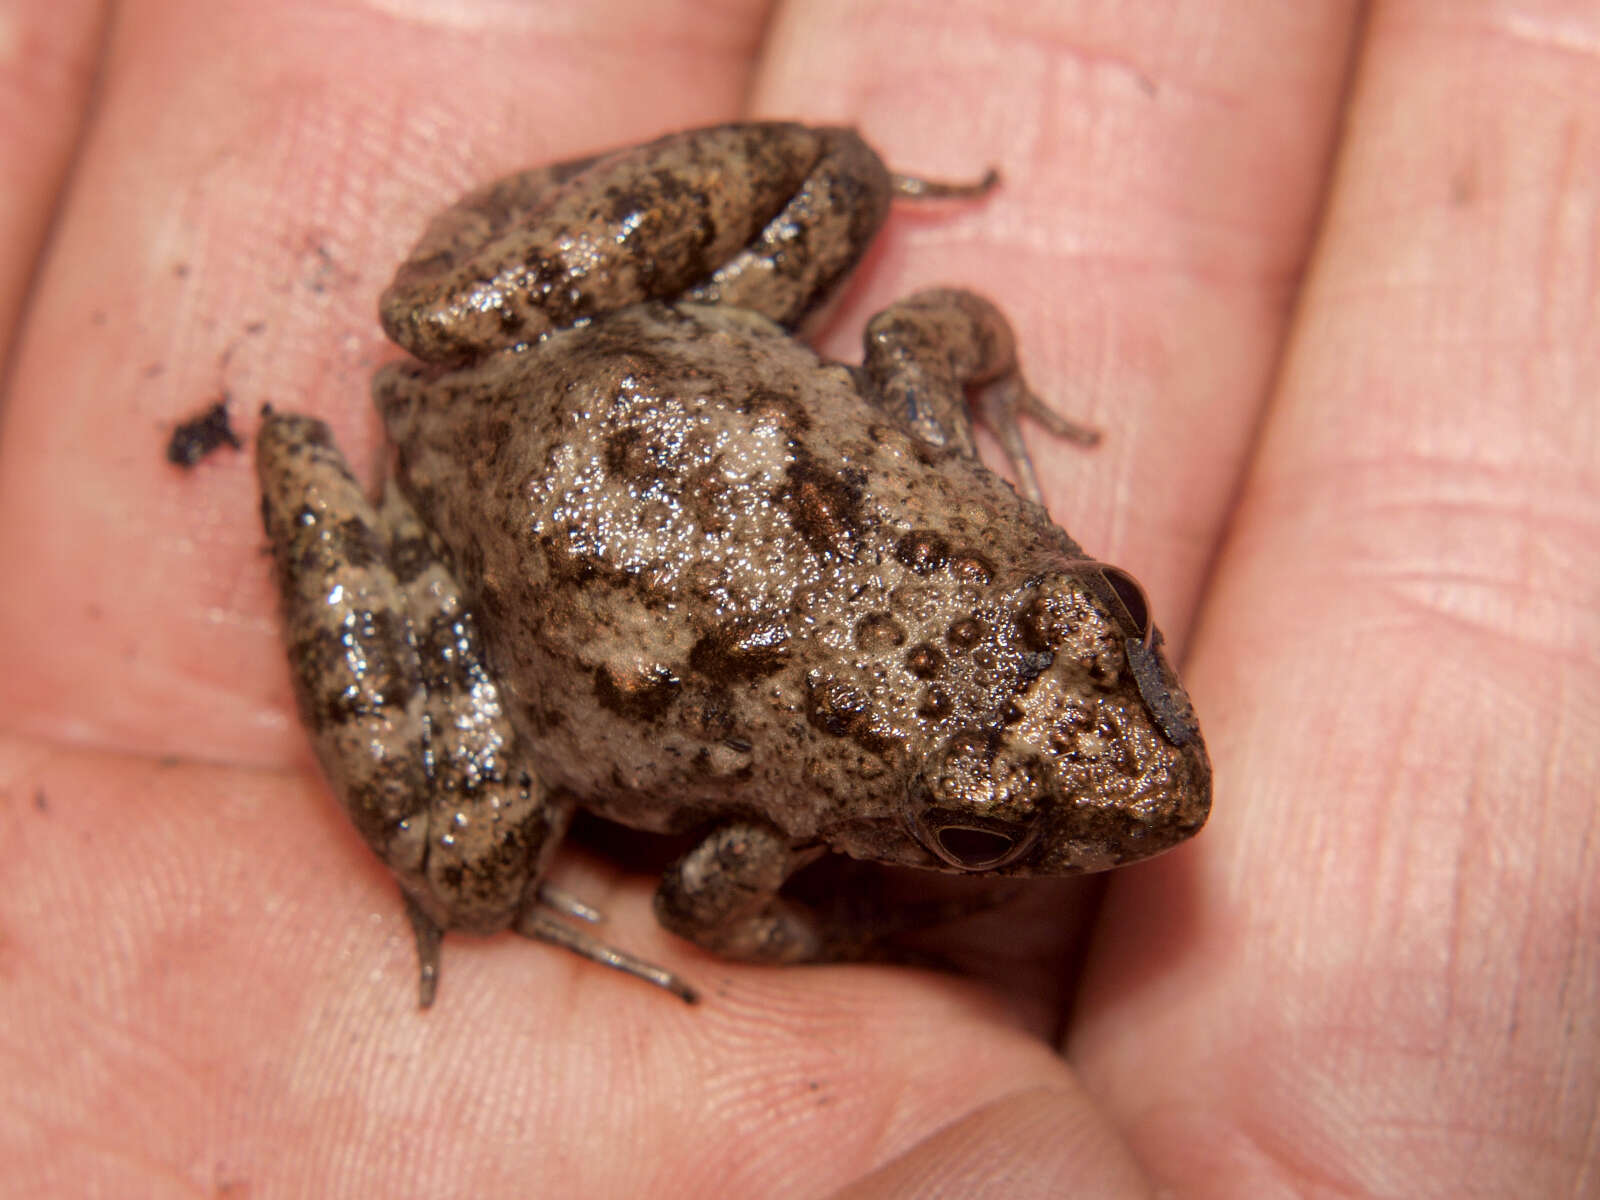 Image of Mababe river frog